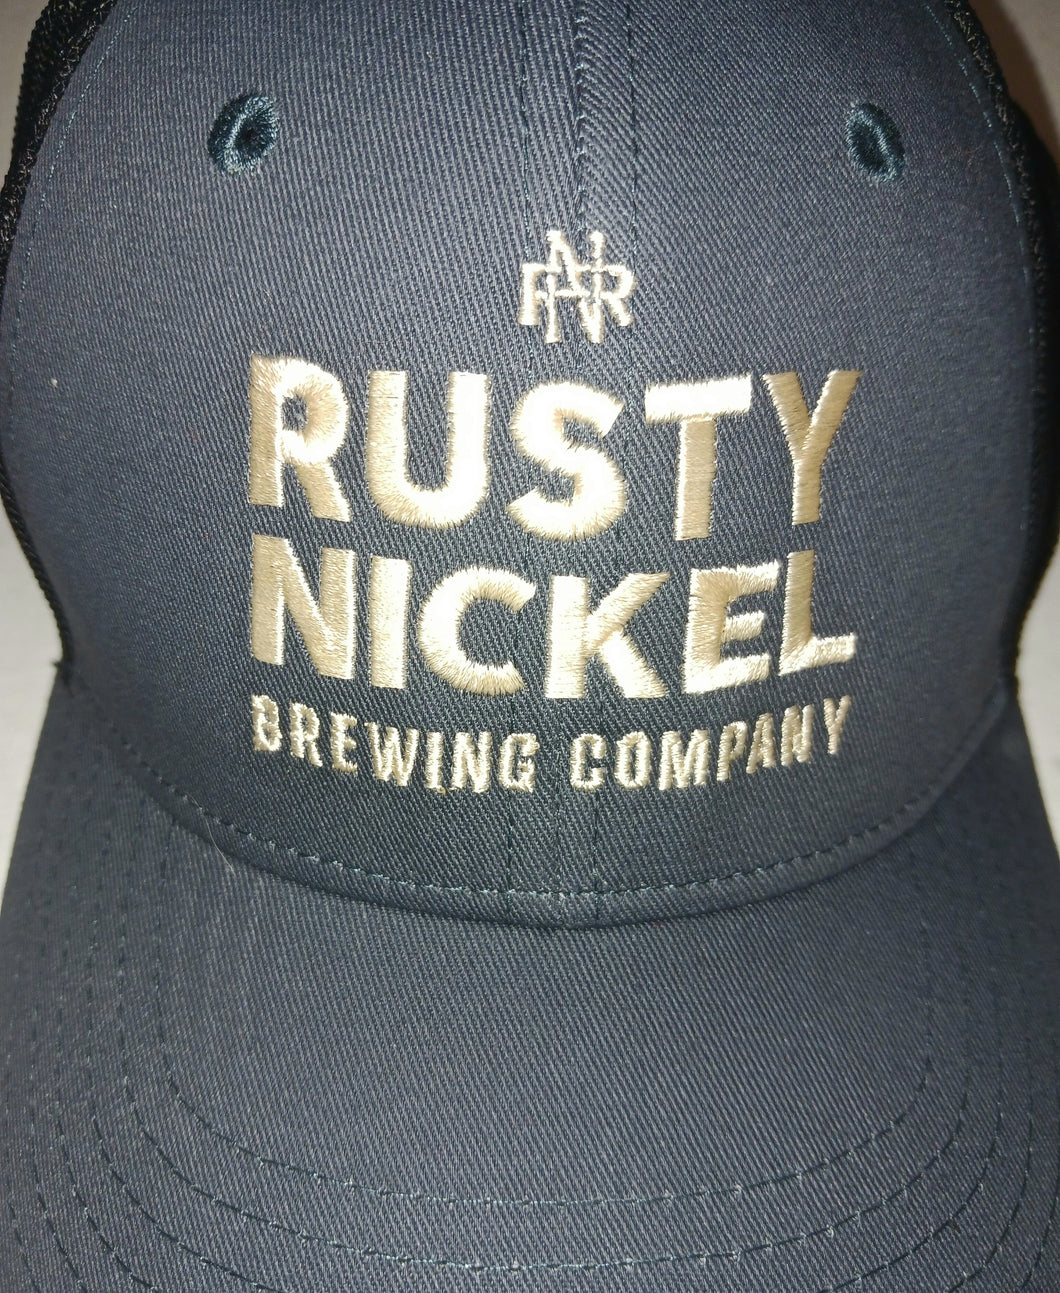 Rusty Nickel Brewing Company Mesh Hat NWOT New Adults One Size West Seneca New York Breweriana